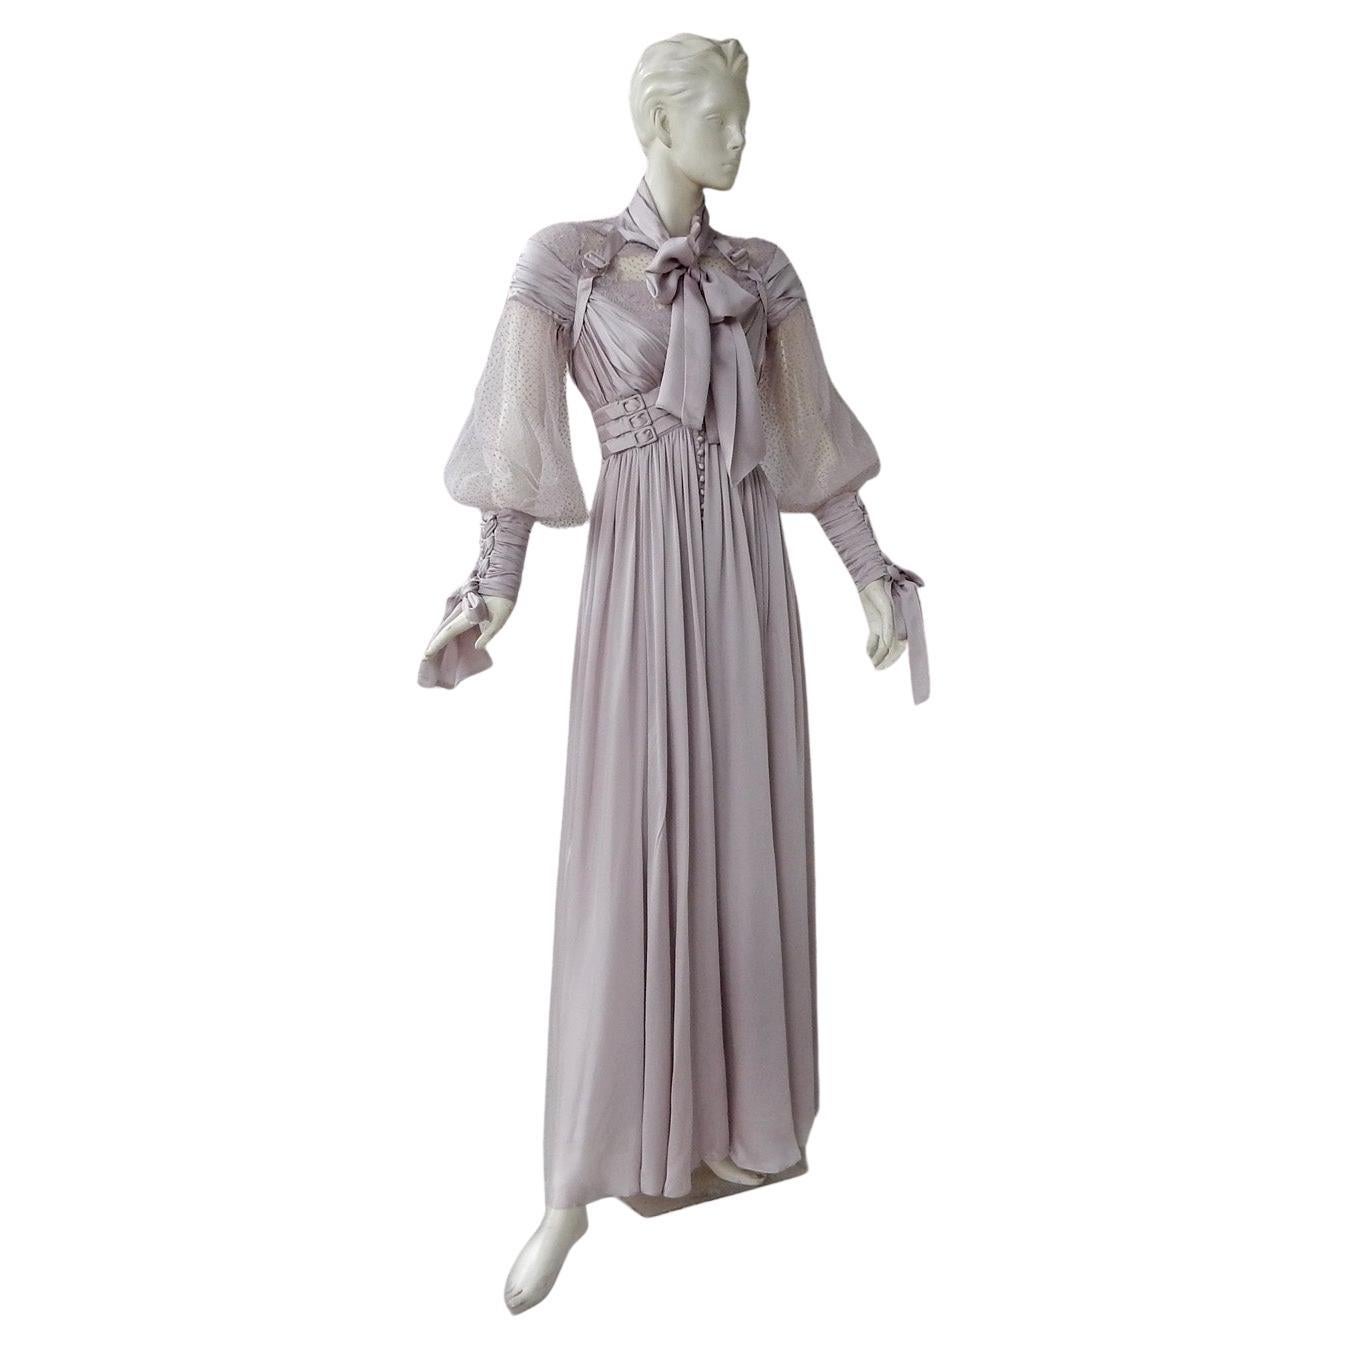 One of Zimmerman's most stunning runway gowns.  Angelic and ethereal silk dress fashioned of light lilac with silver hues.  Features elaborate detailing with feminine style harness; wonderful drape and highly fashionable bishop sleeves detailed at